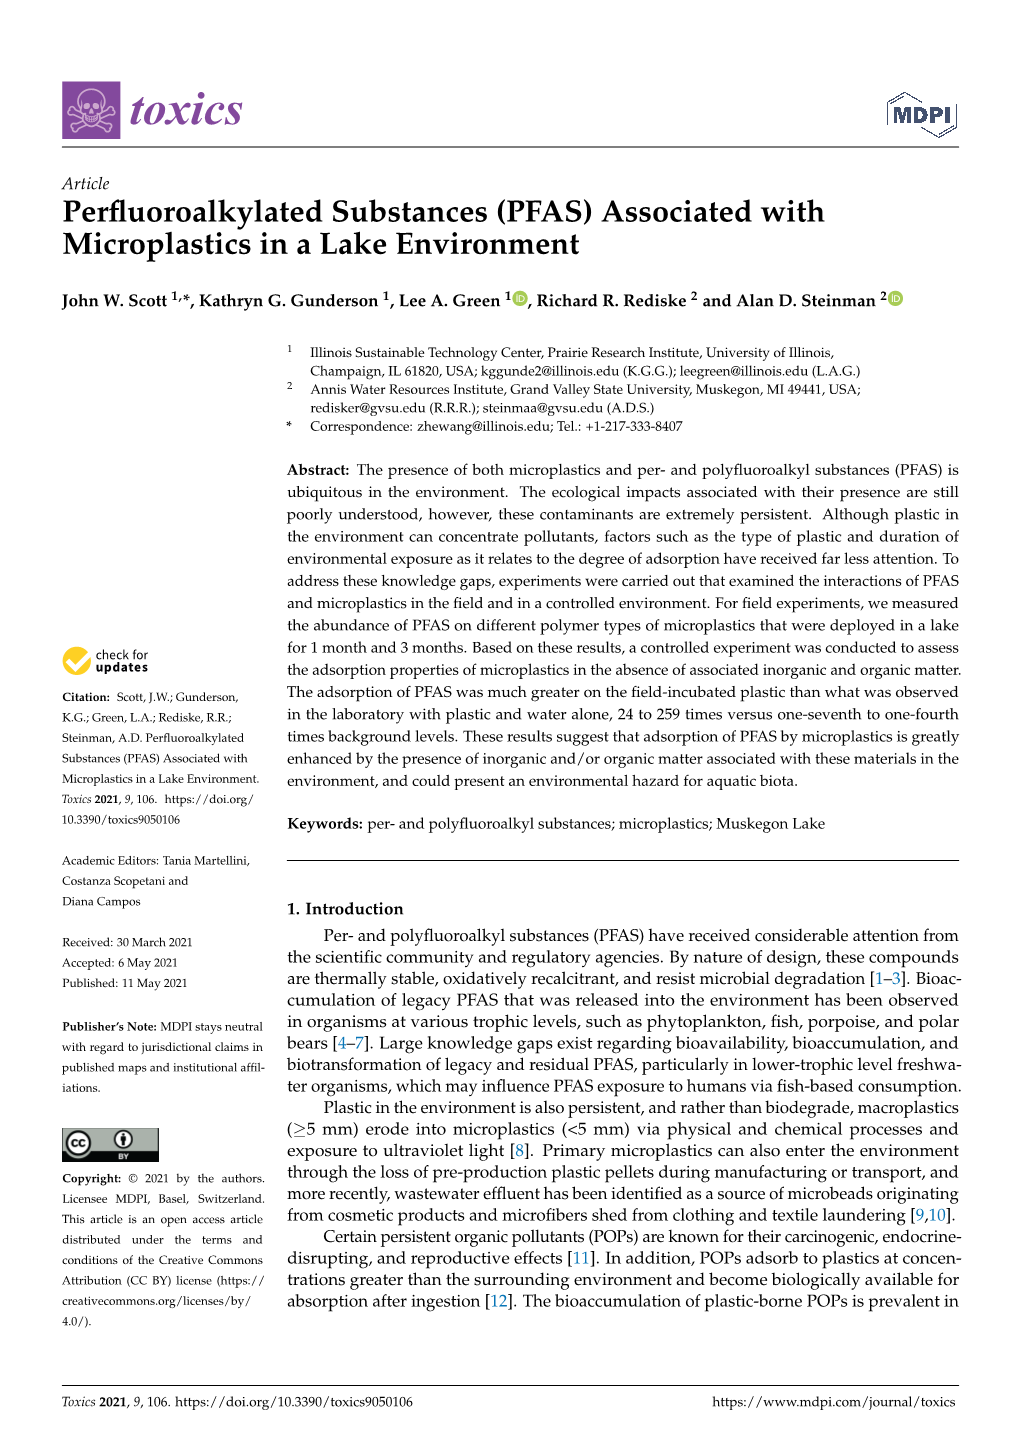 PFAS) Associated with Microplastics in a Lake Environment